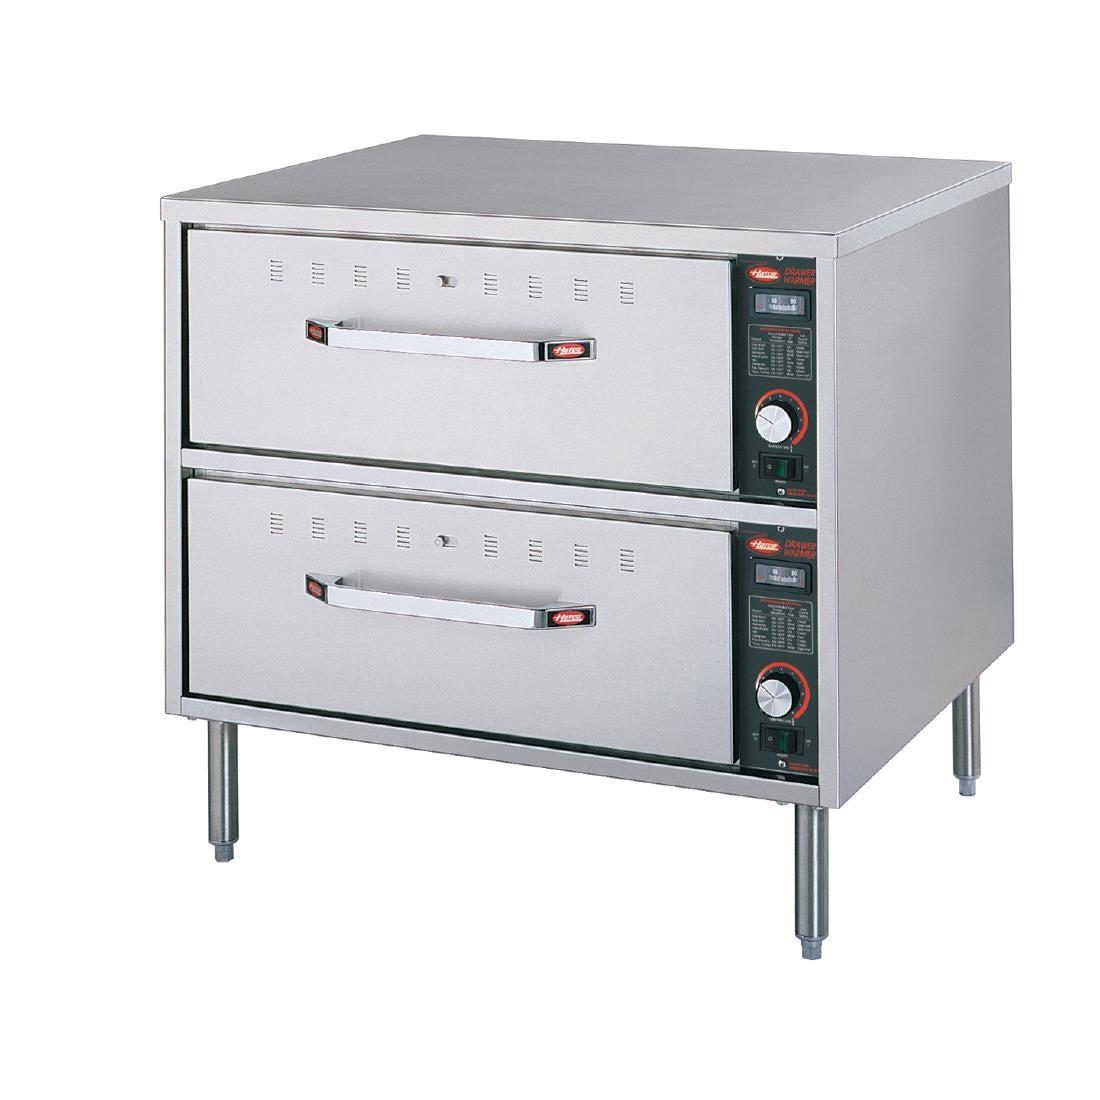 Hatco Warming Drawers HDW-2 JD Catering Equipment Solutions Ltd